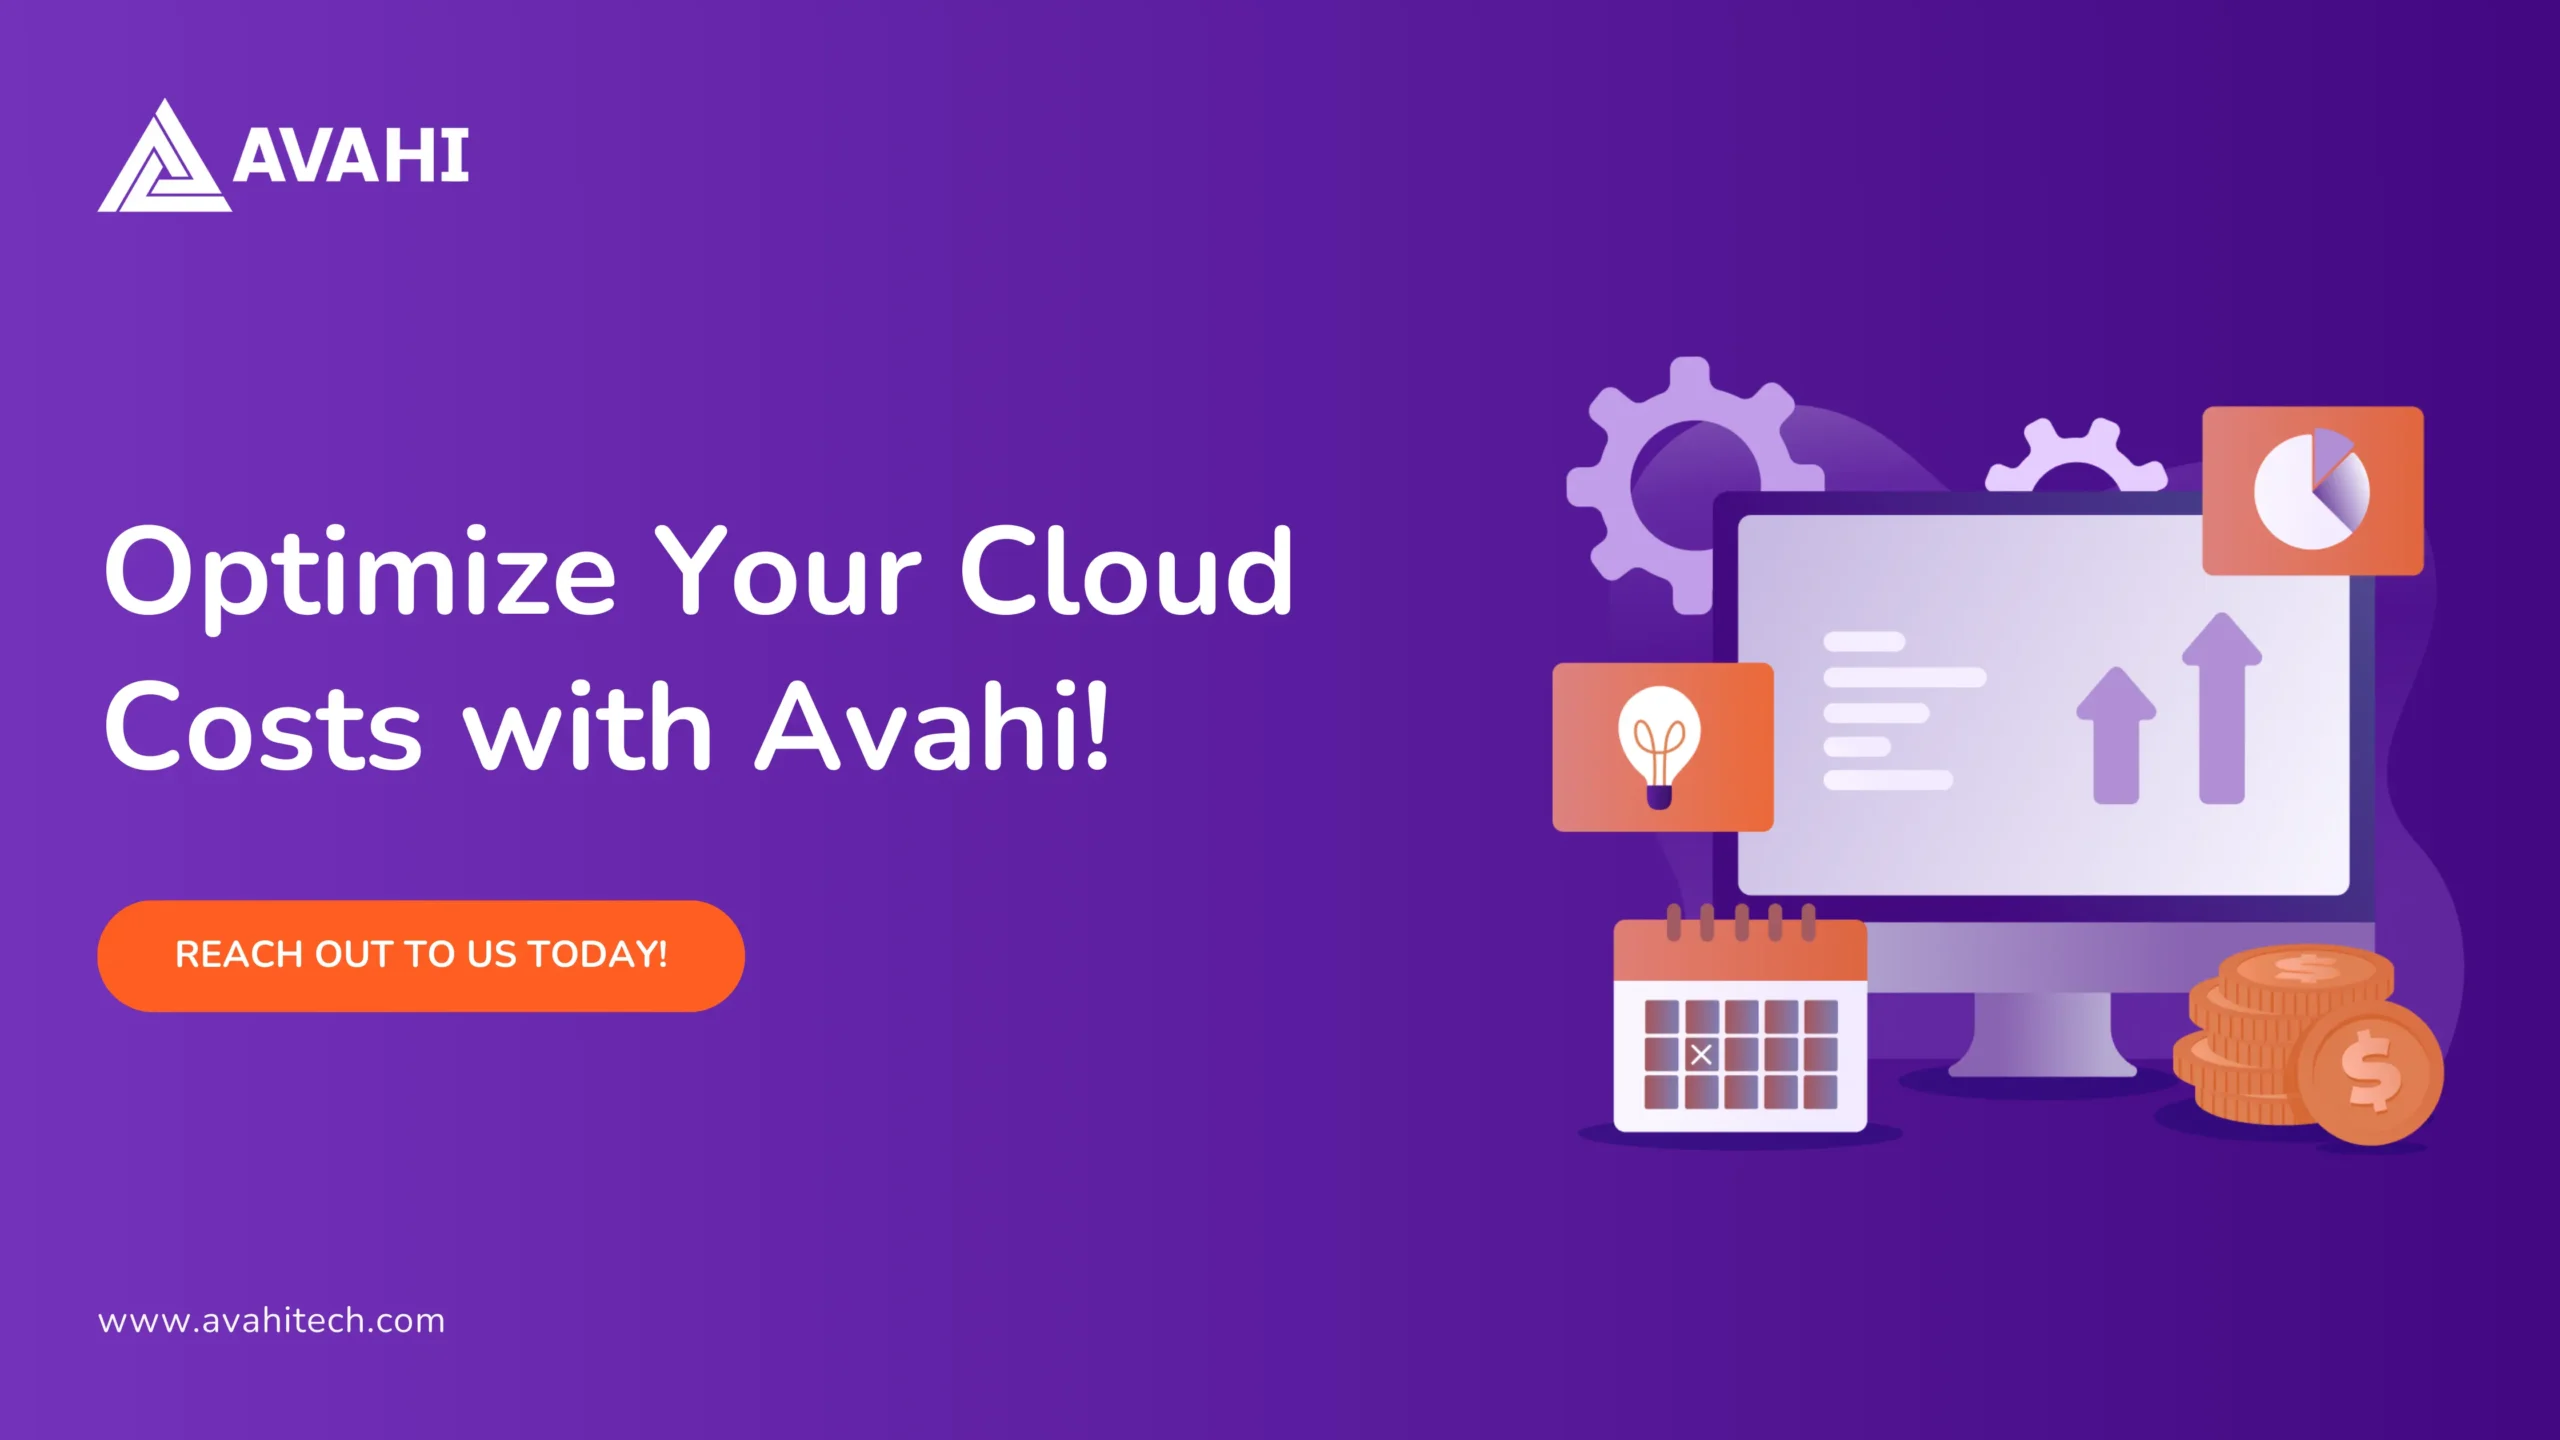 Optimize Your Cloud Costs with Avahi!